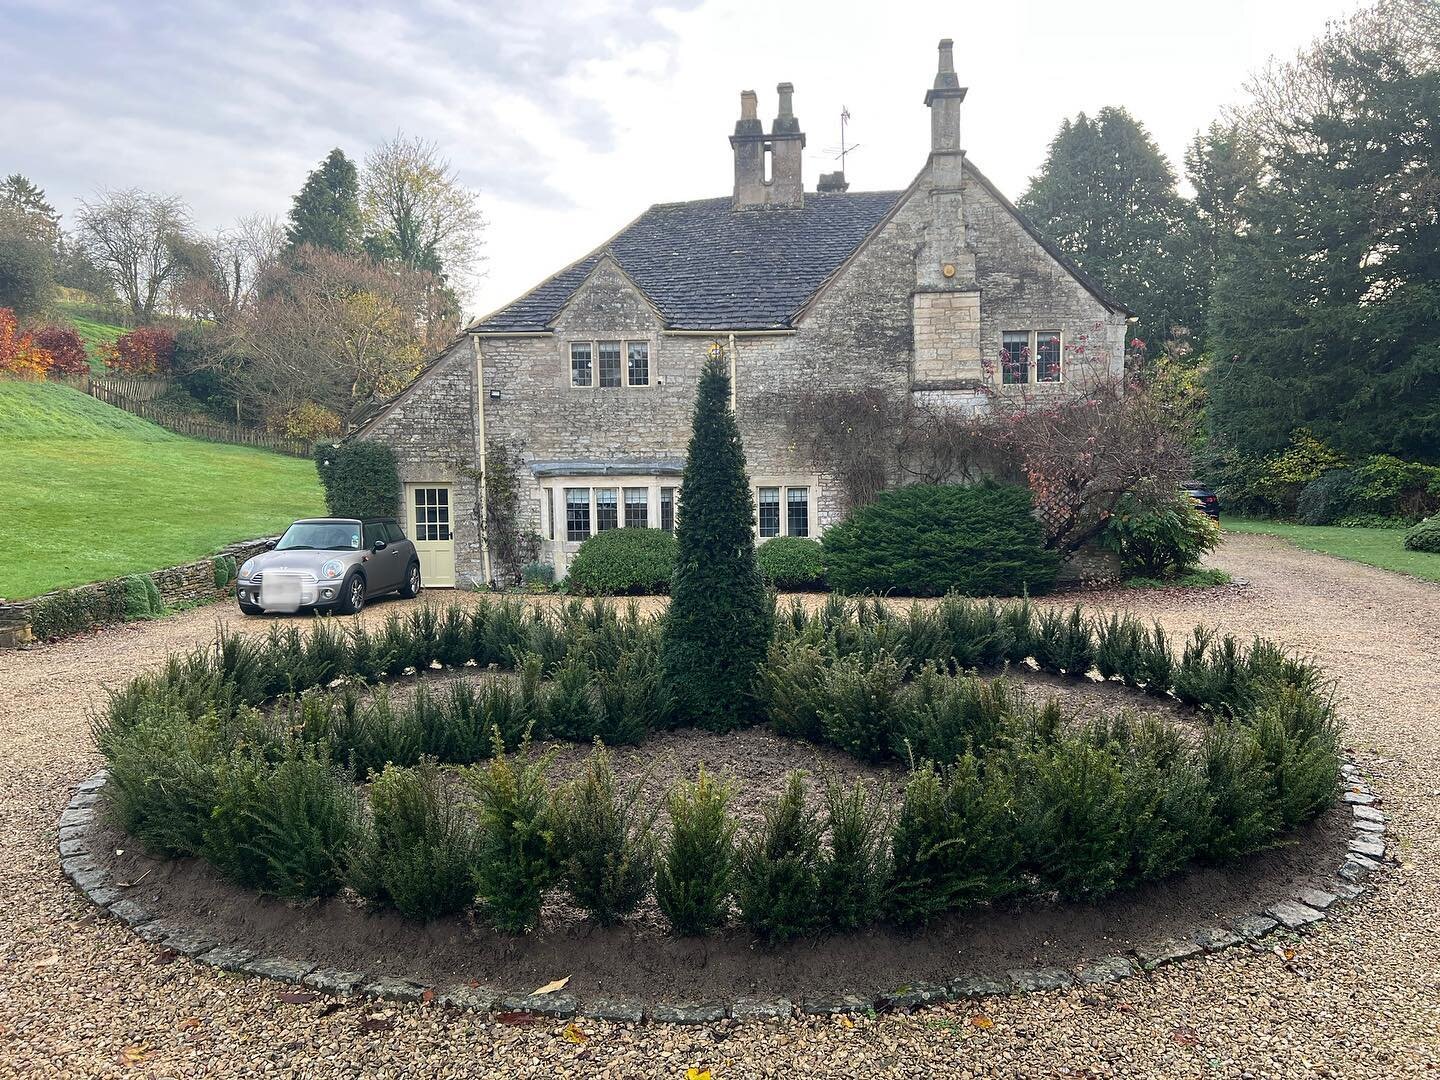 Despite the driving rain on Monday, we planted up this island with the Yew topiary cone and surrounding hedge. The area has been known to flood hence planting higher up and with a lot of gravel installed to aid drainage. The infill planting will be d